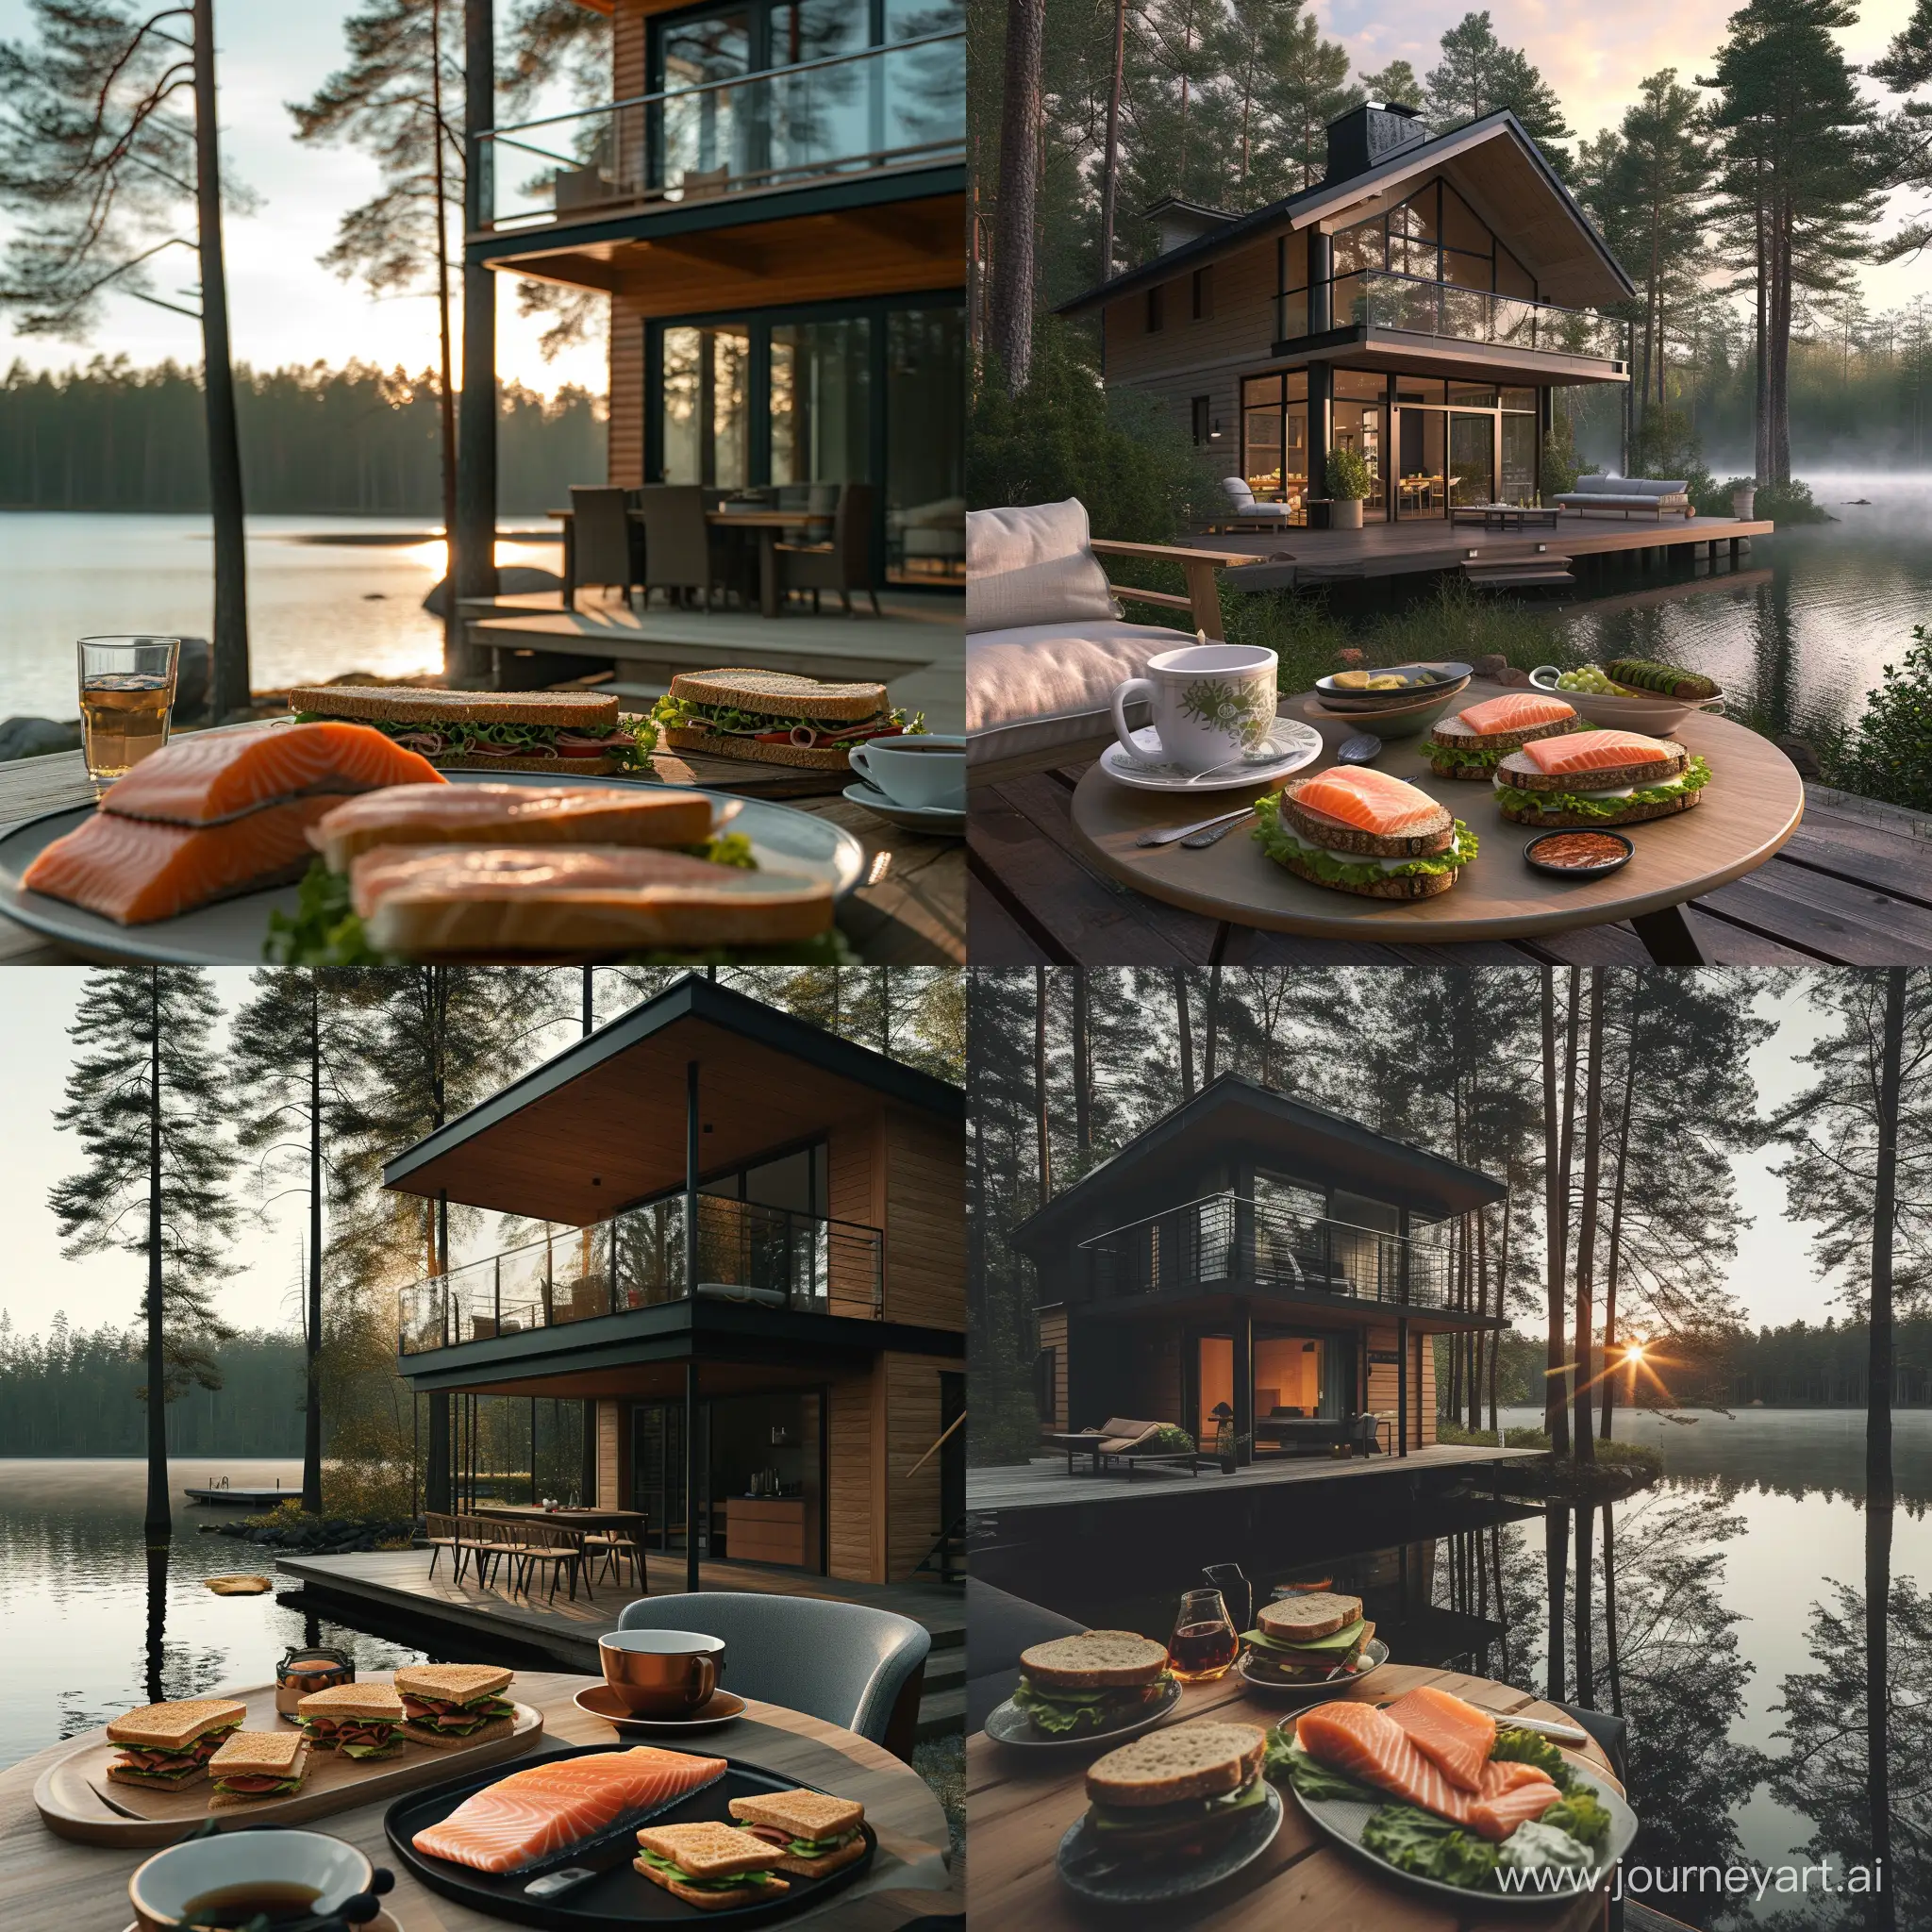 Serene-Sunrise-Scene-TwoStory-Lake-House-in-Pine-Forest-with-Coffee-and-Salmon-Sandwiches